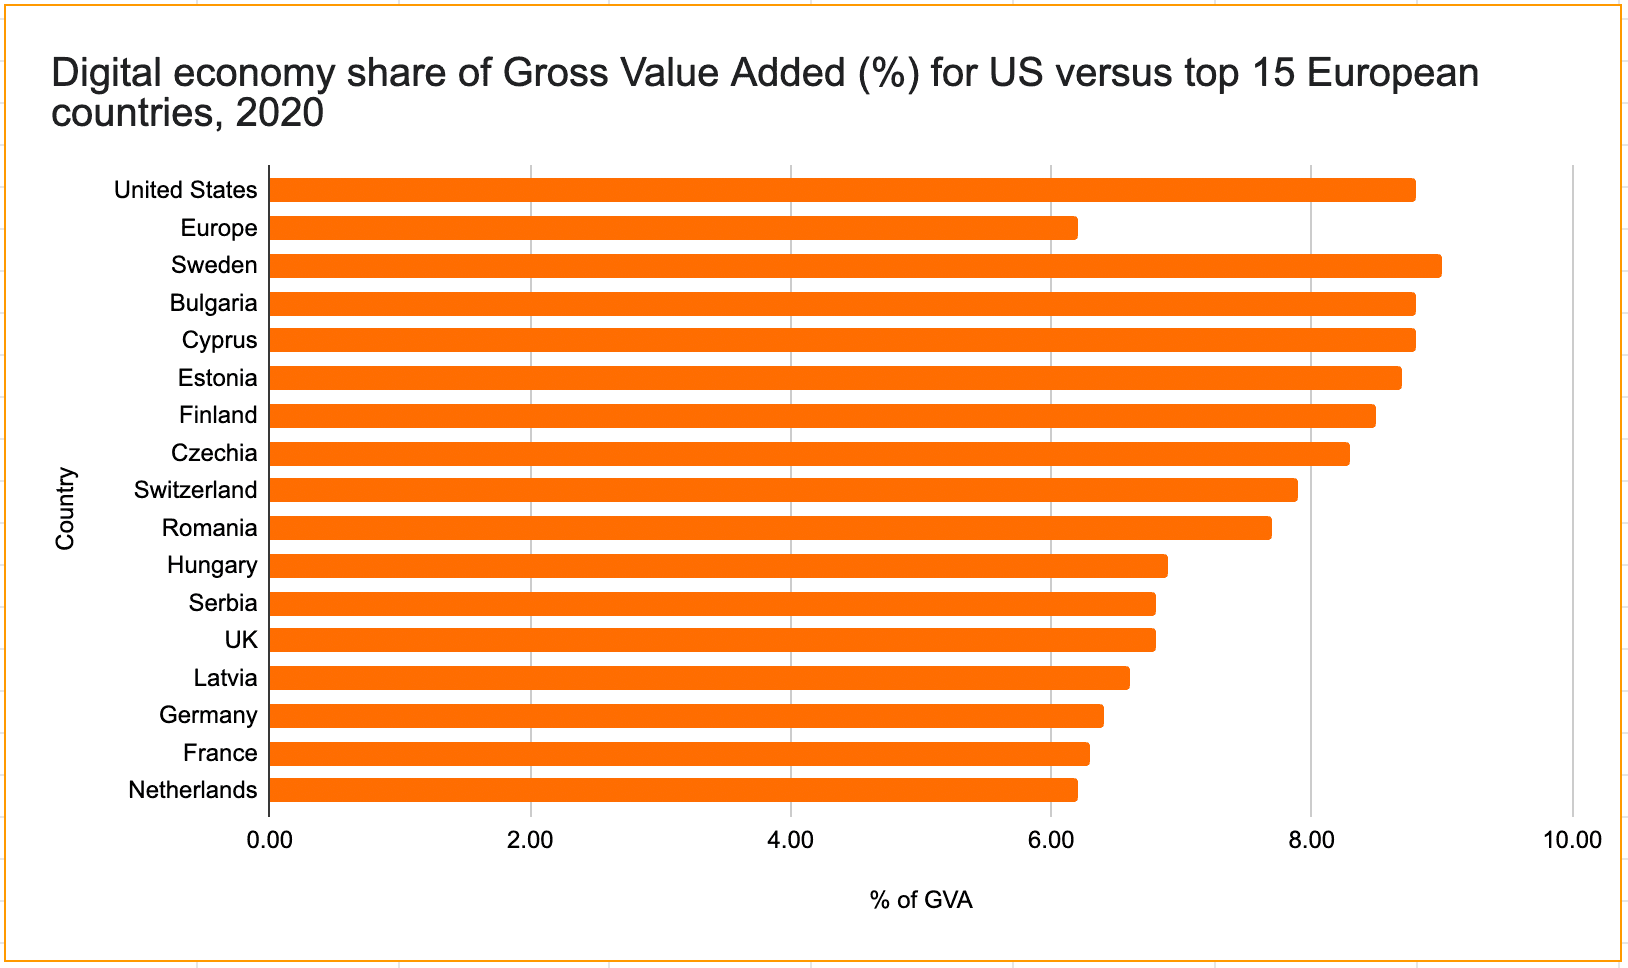 Digital economy share of Gross Value Added (%) for US versus top 15 European countries, 2020